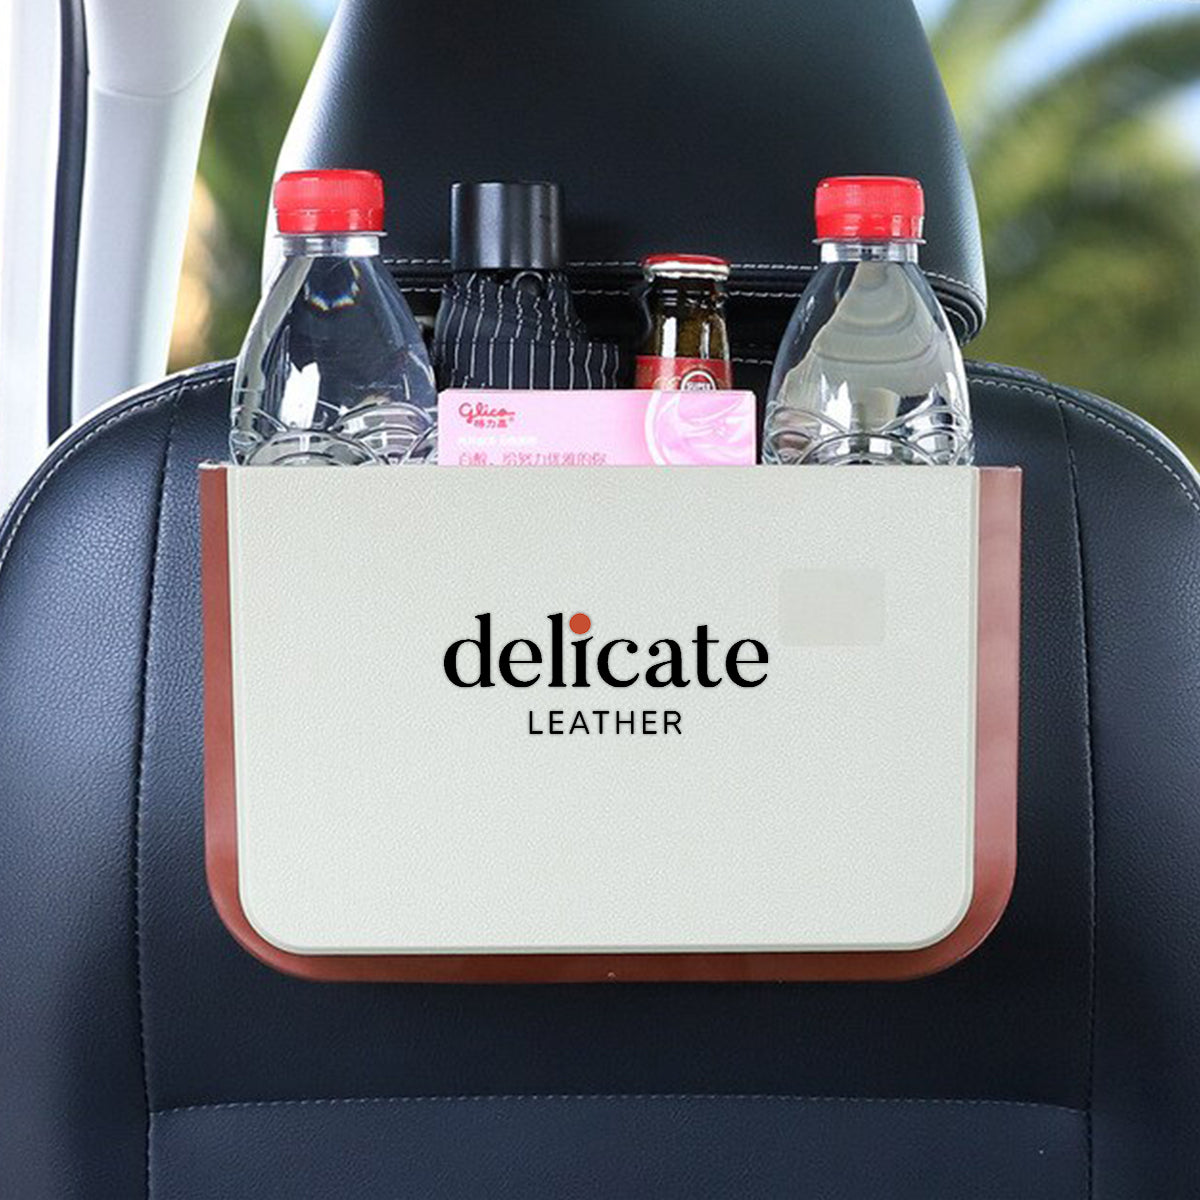 Hanging Waterproof Car Trash can-Foldable, Custom For Your Cars, Waterproof, and Equipped with Cup Holders and Trays. Multi-Purpose, Car Accessories JG11992 - Delicate Leather